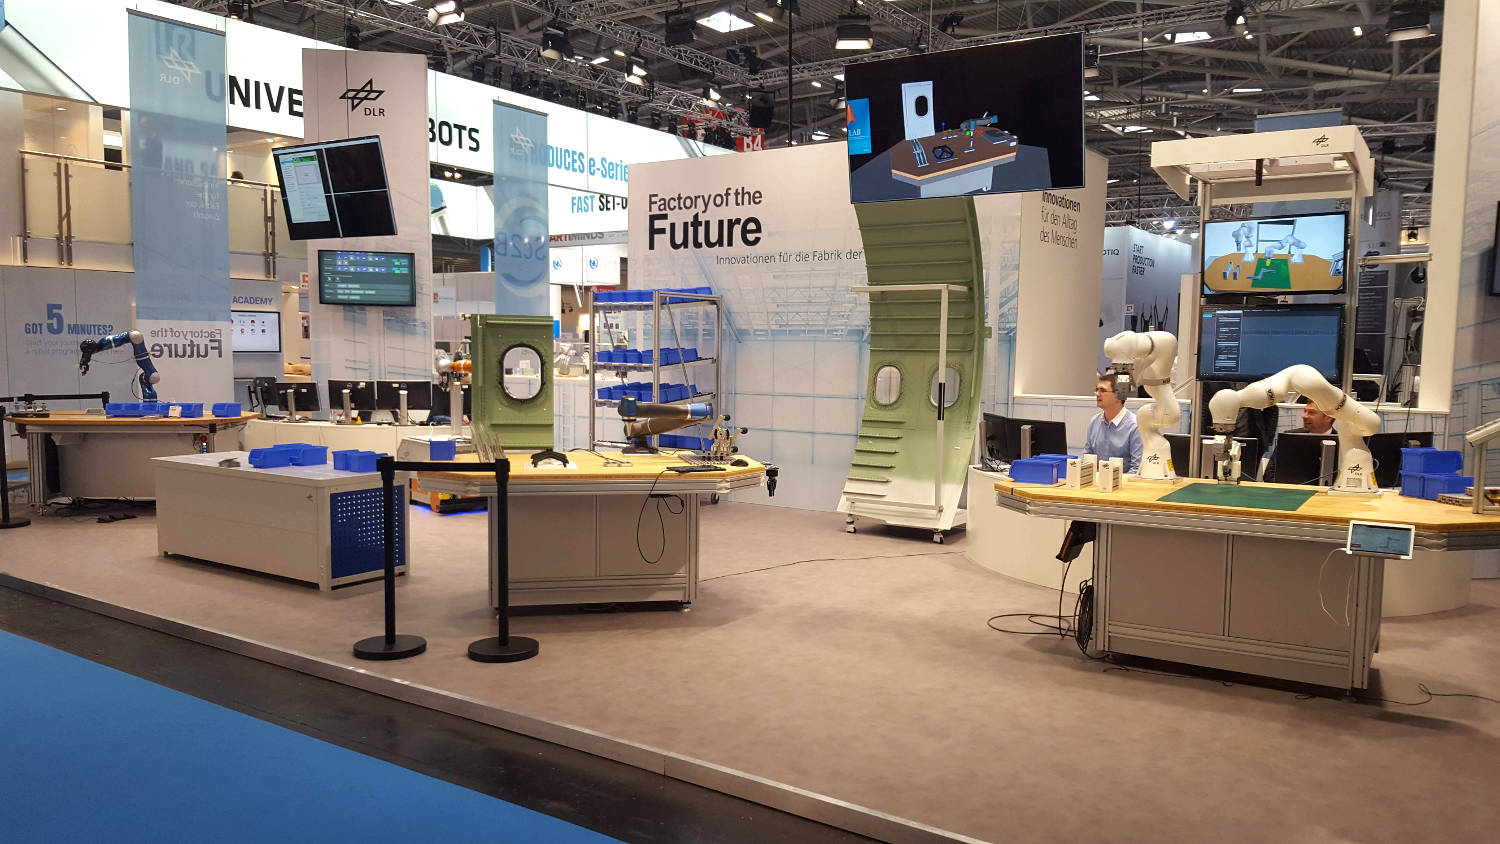 The Factory of the Future at the DLR booth of the Automatica fair 2018